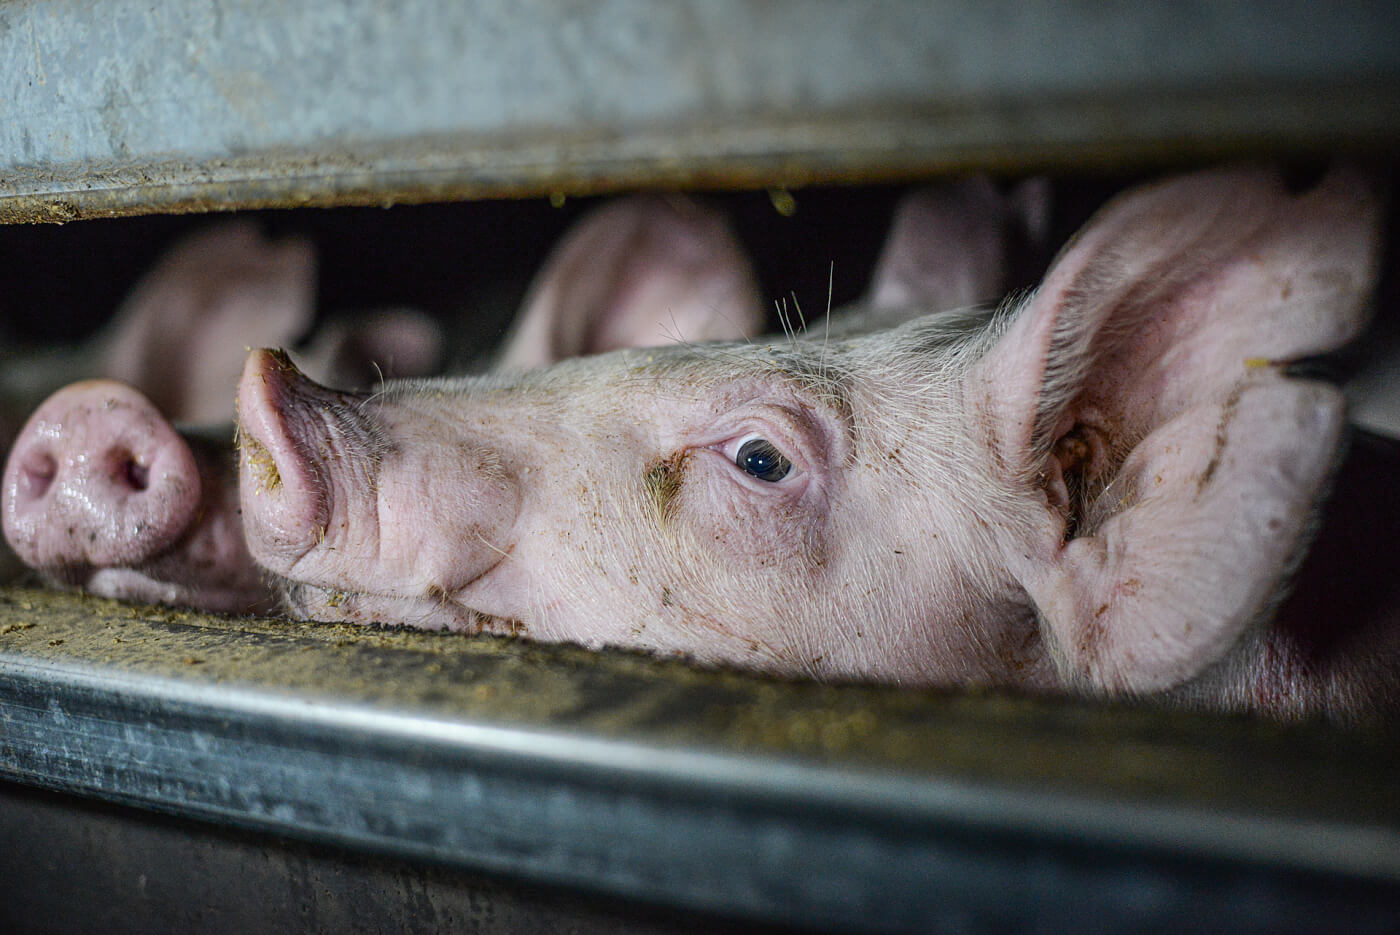 Victoria’s Pig Welfare Inquiry Backs Lab-Grown Meat and CCTV in Slaughterhouses